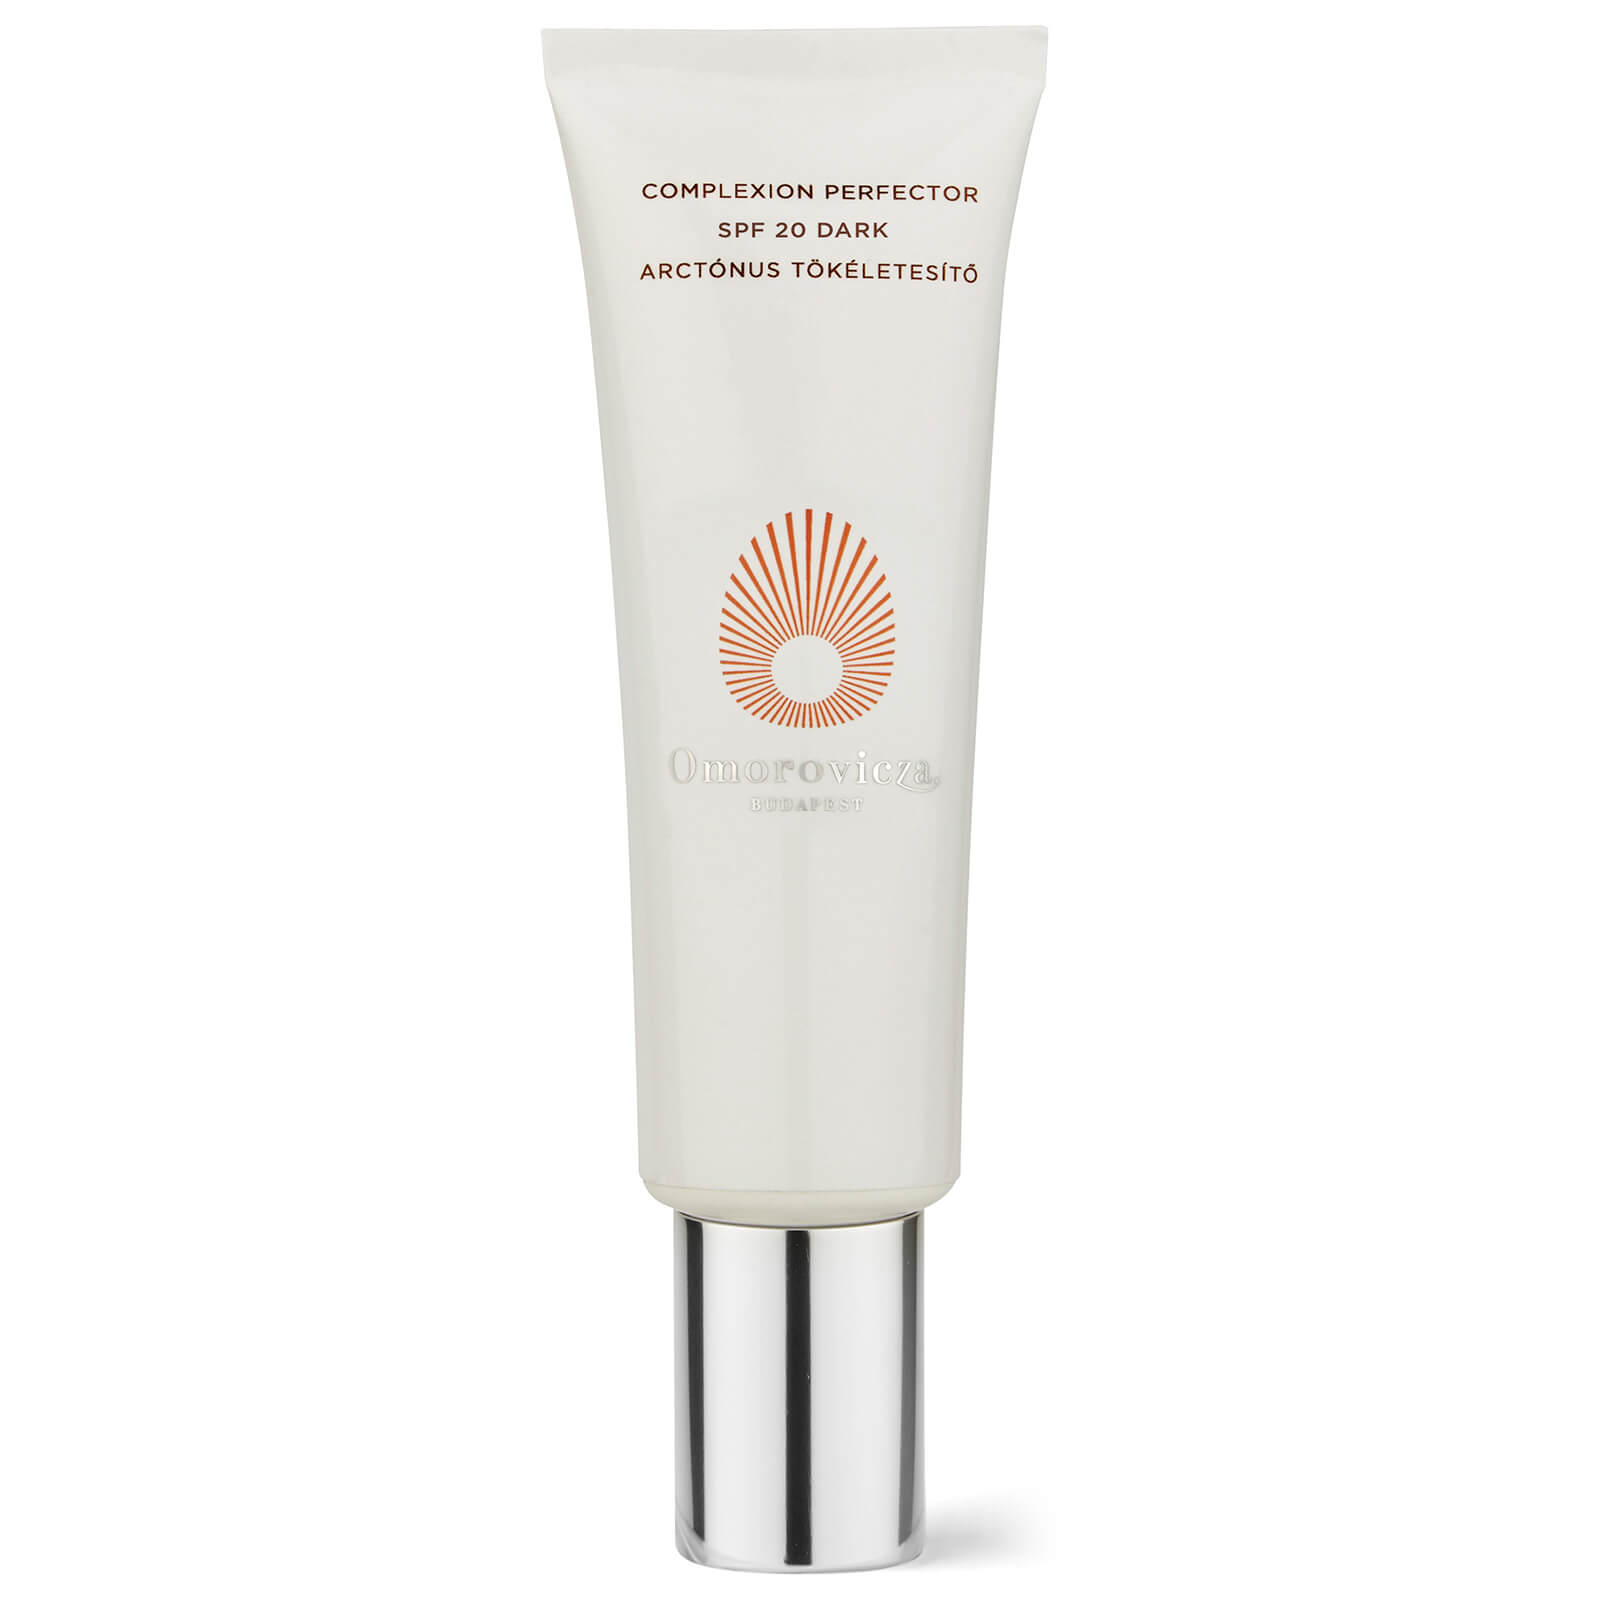 Omorovicza Complexion Perfector Spf20 Lotion 50ml (various Shades) - Dark In White